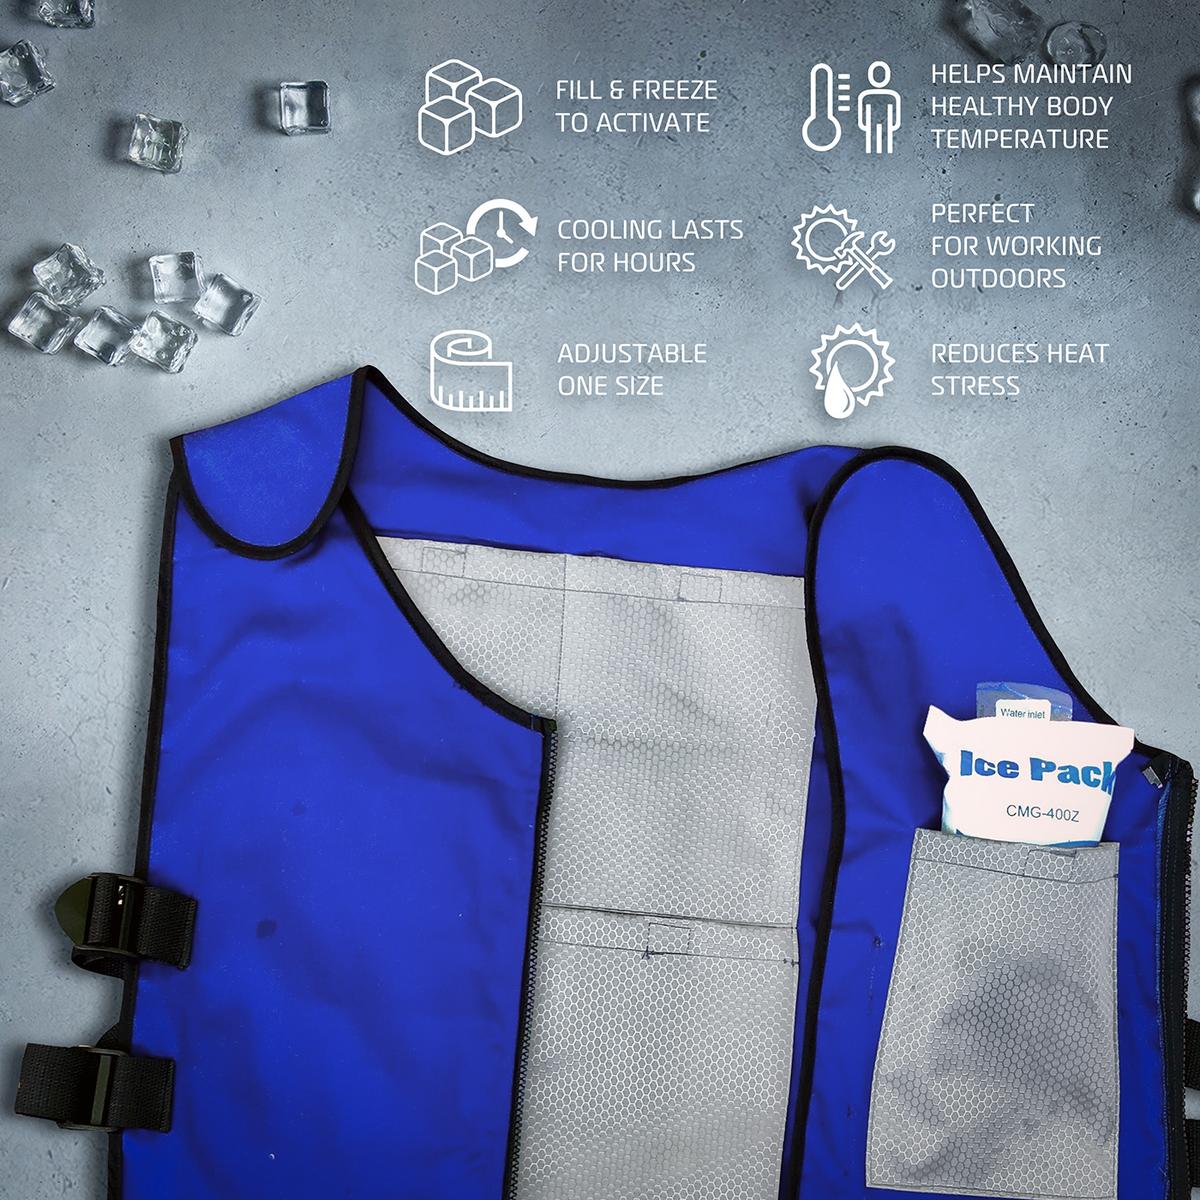 AlphaCool Arctic Cooling Ice Vest with Self-Fill Reusable Ice Packs - Info